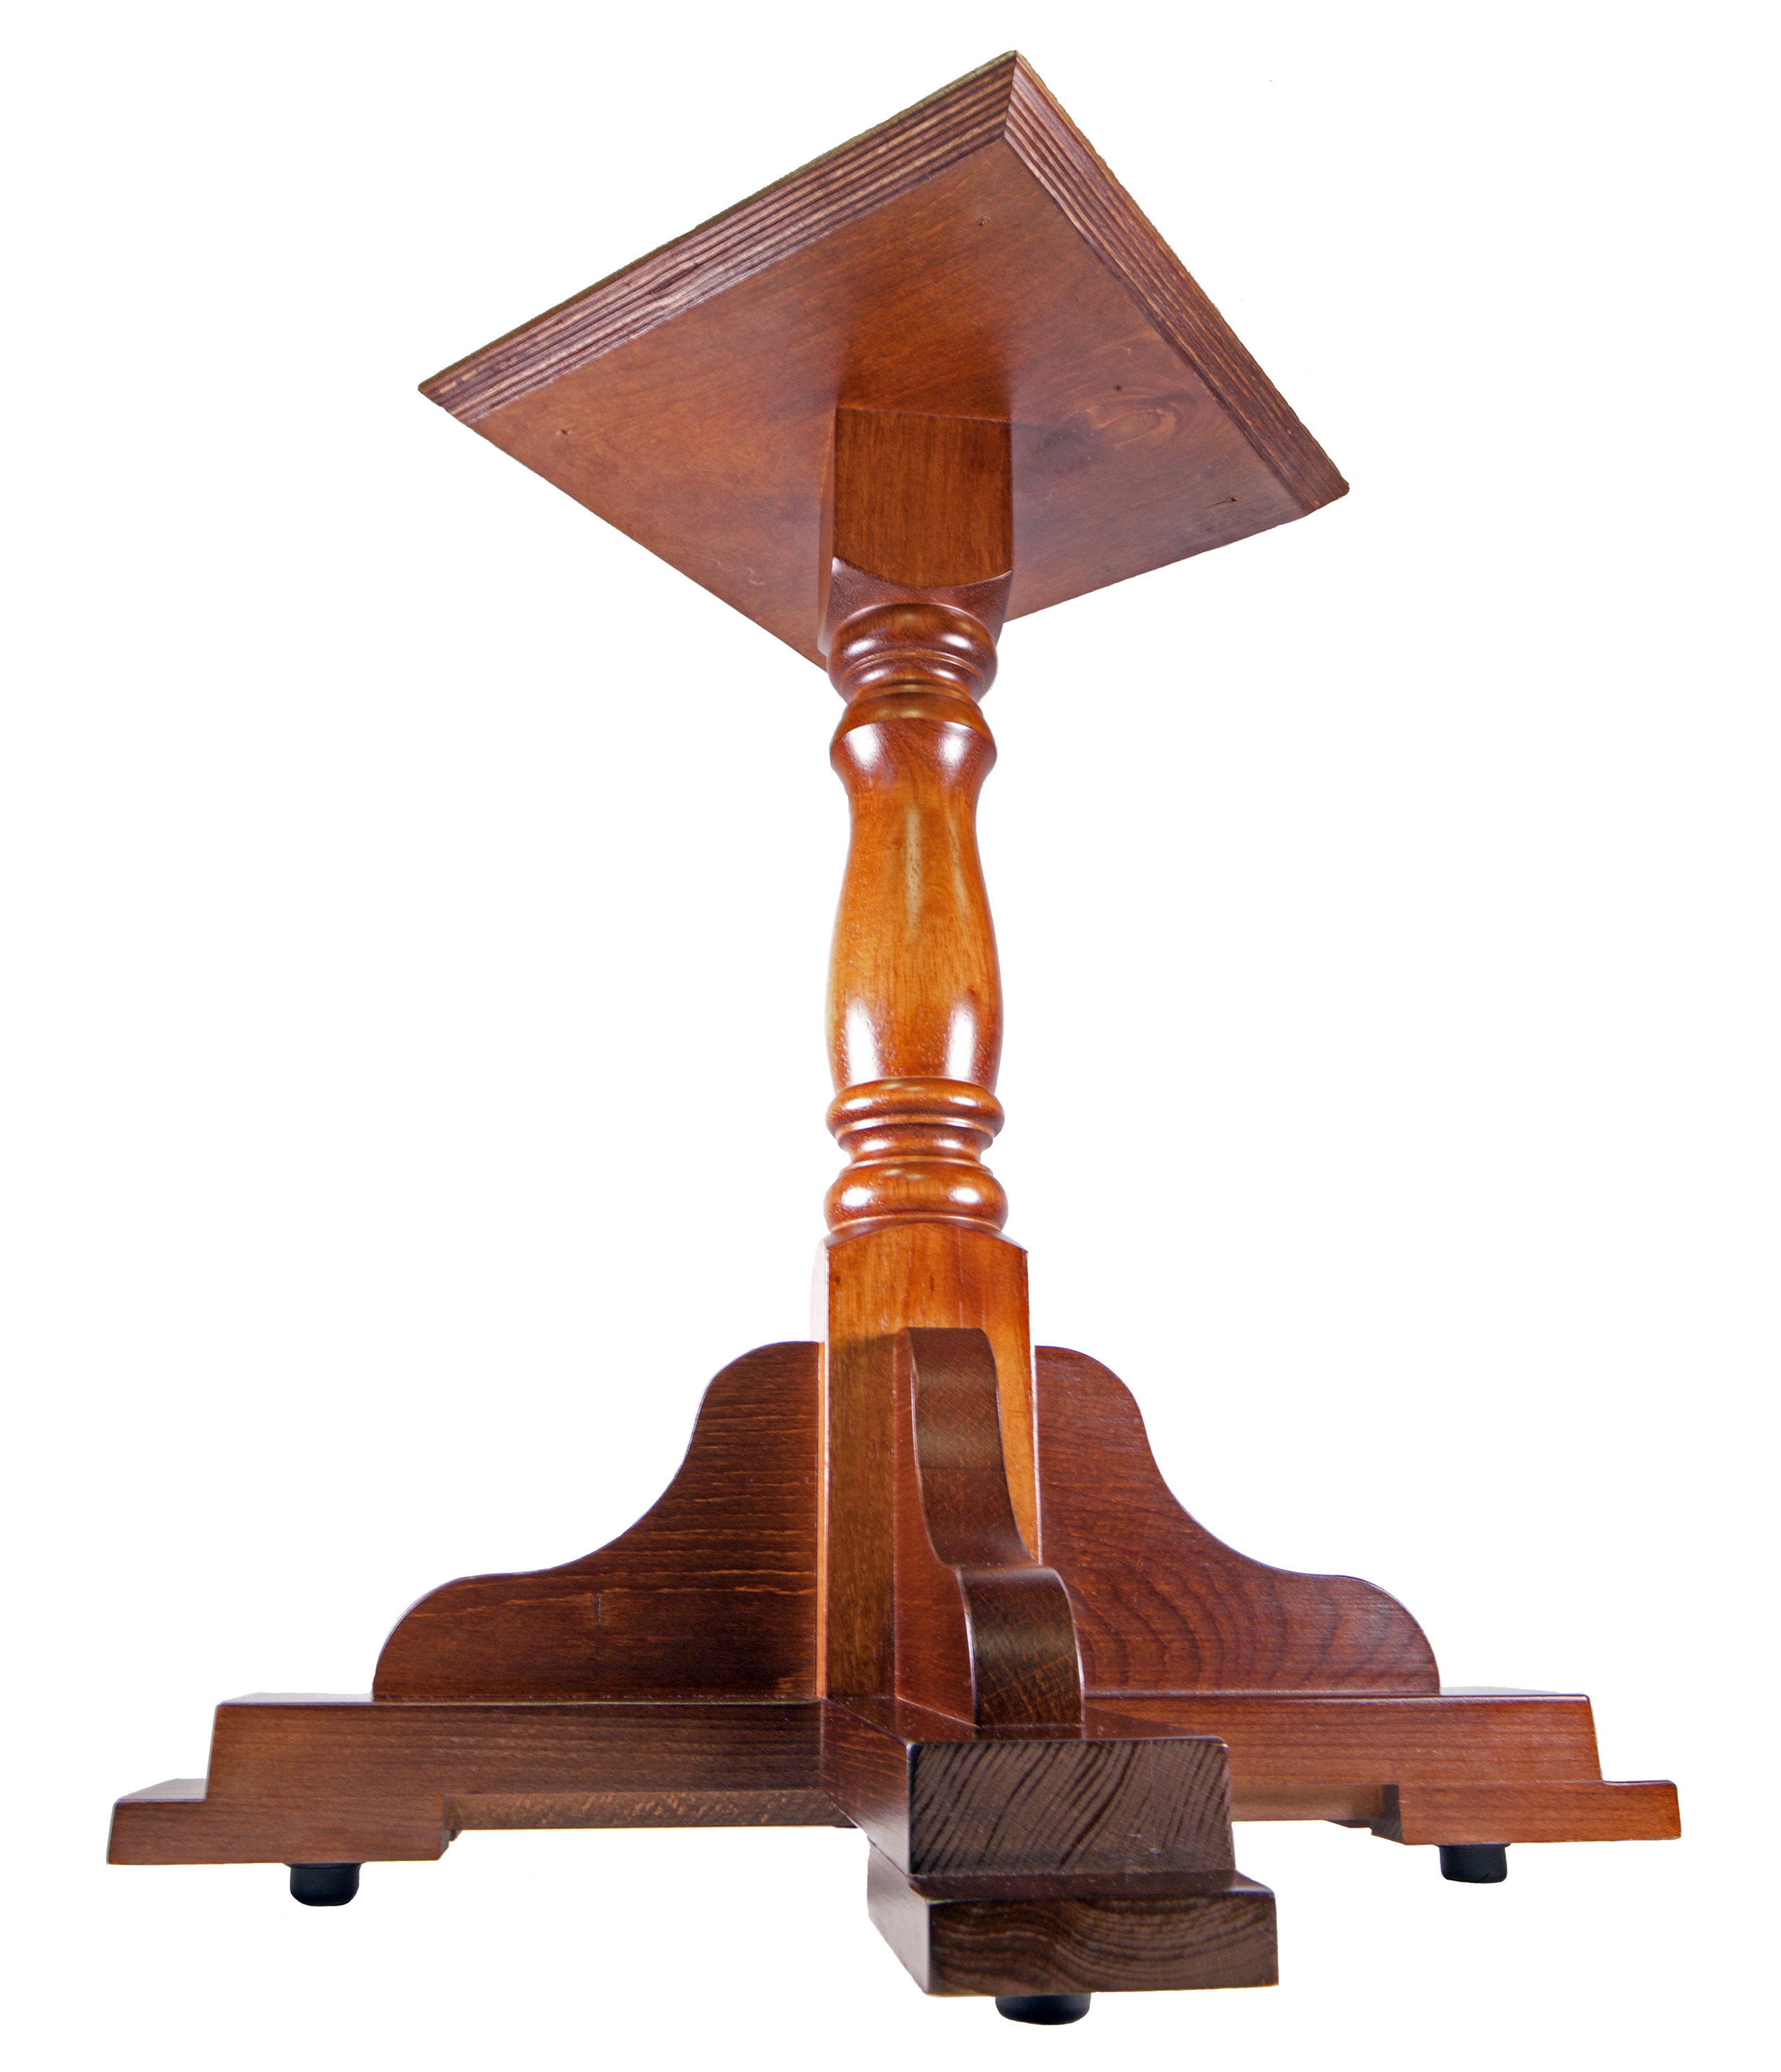 The Wellington - Carlick's self-stabilising table base with FLAT technology inside